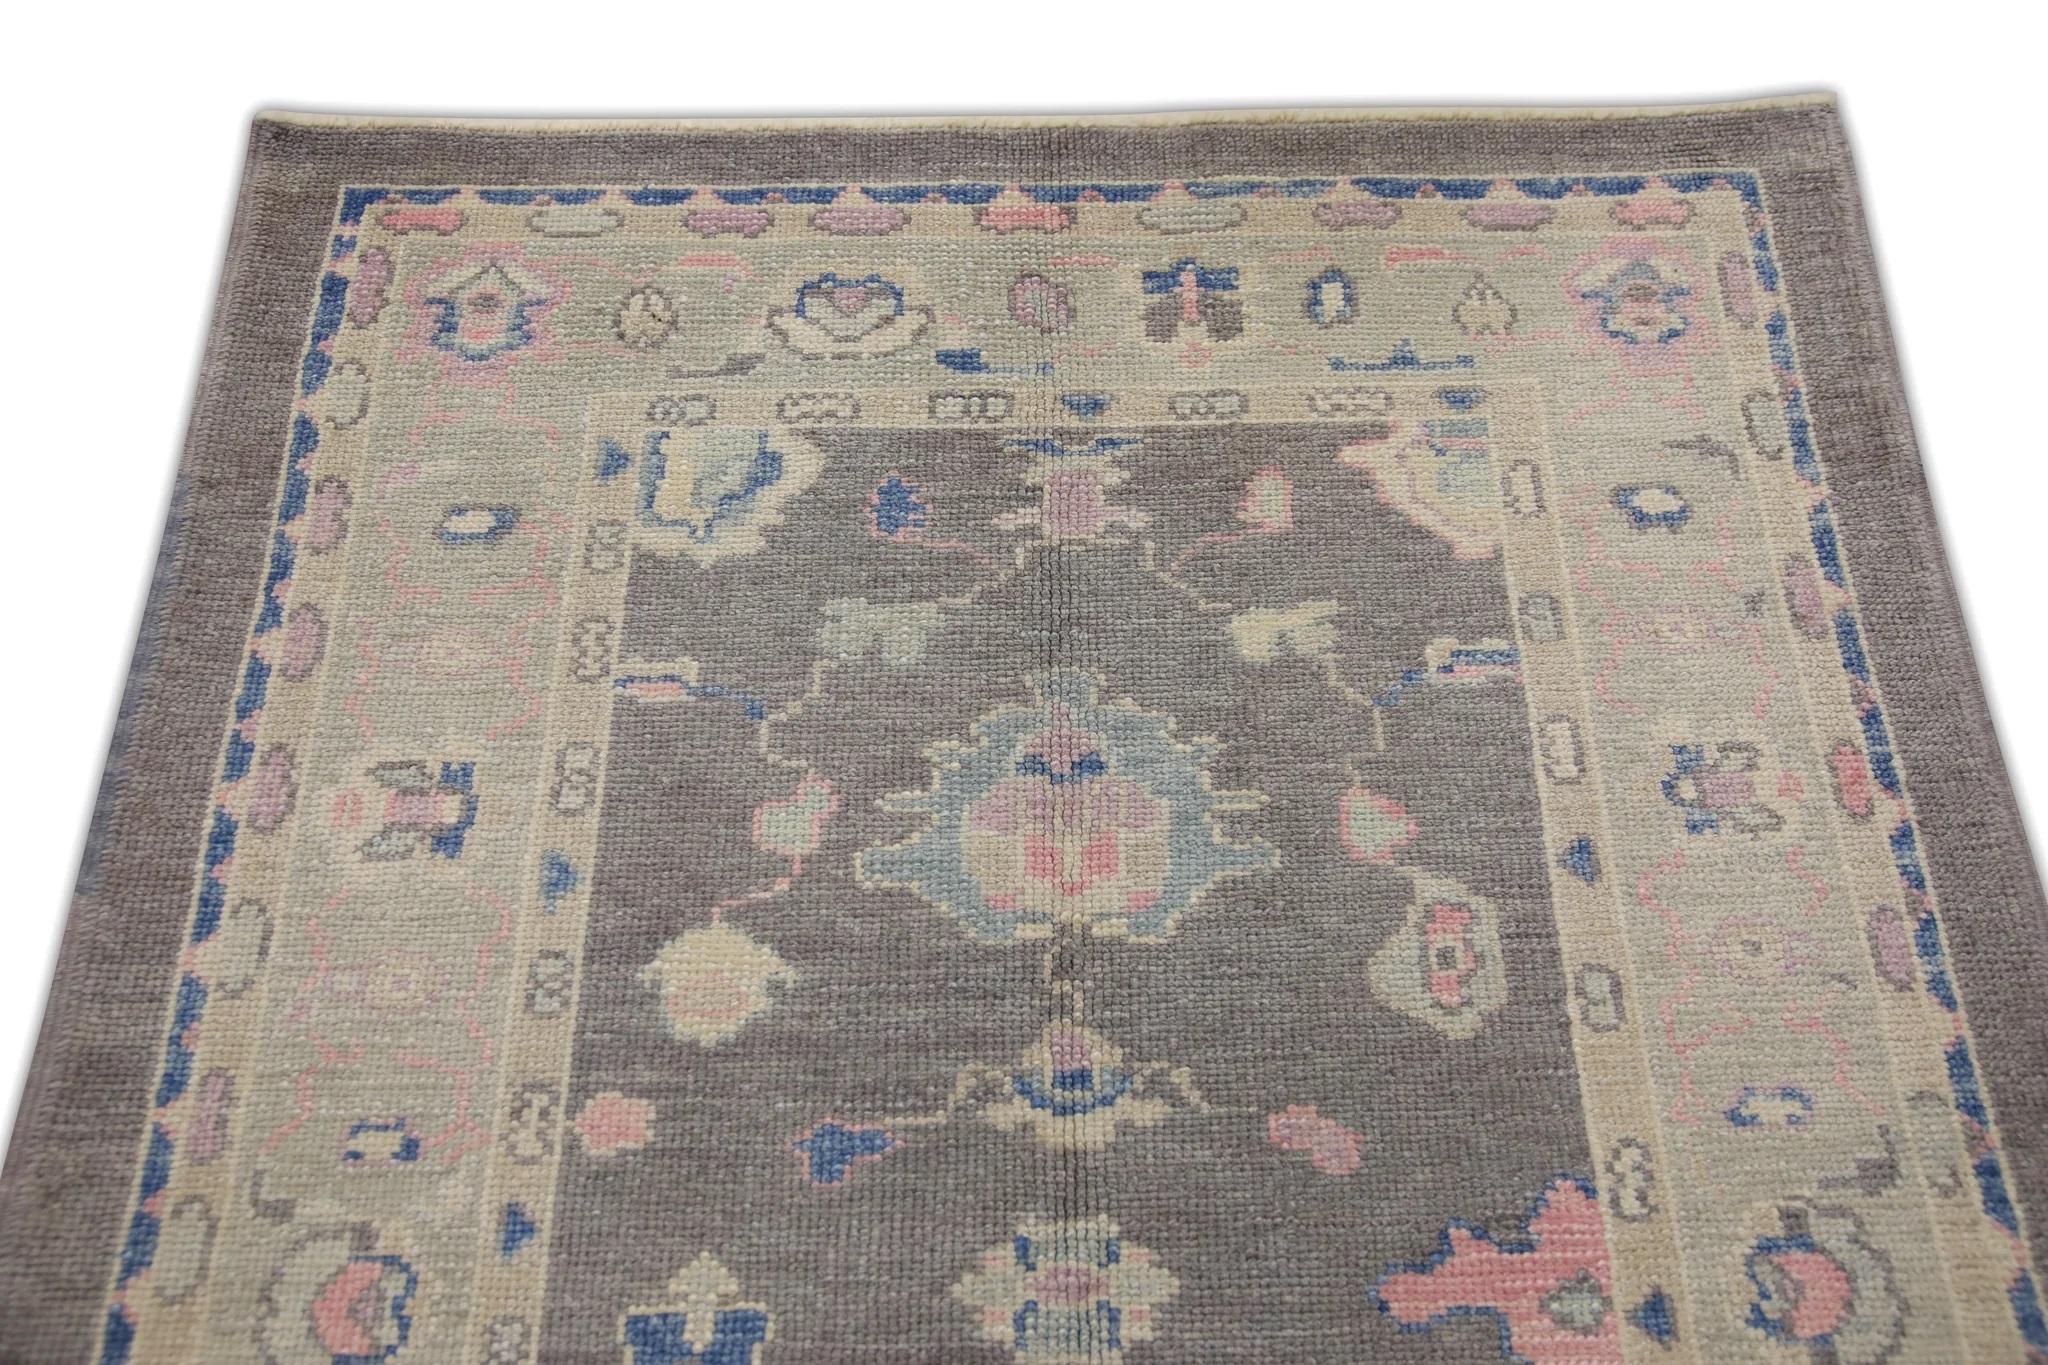 Vegetable Dyed Dark Mauve Handwoven Wool Turkish Oushak Rug in Colorful Floral Design 4' x 5'11 For Sale